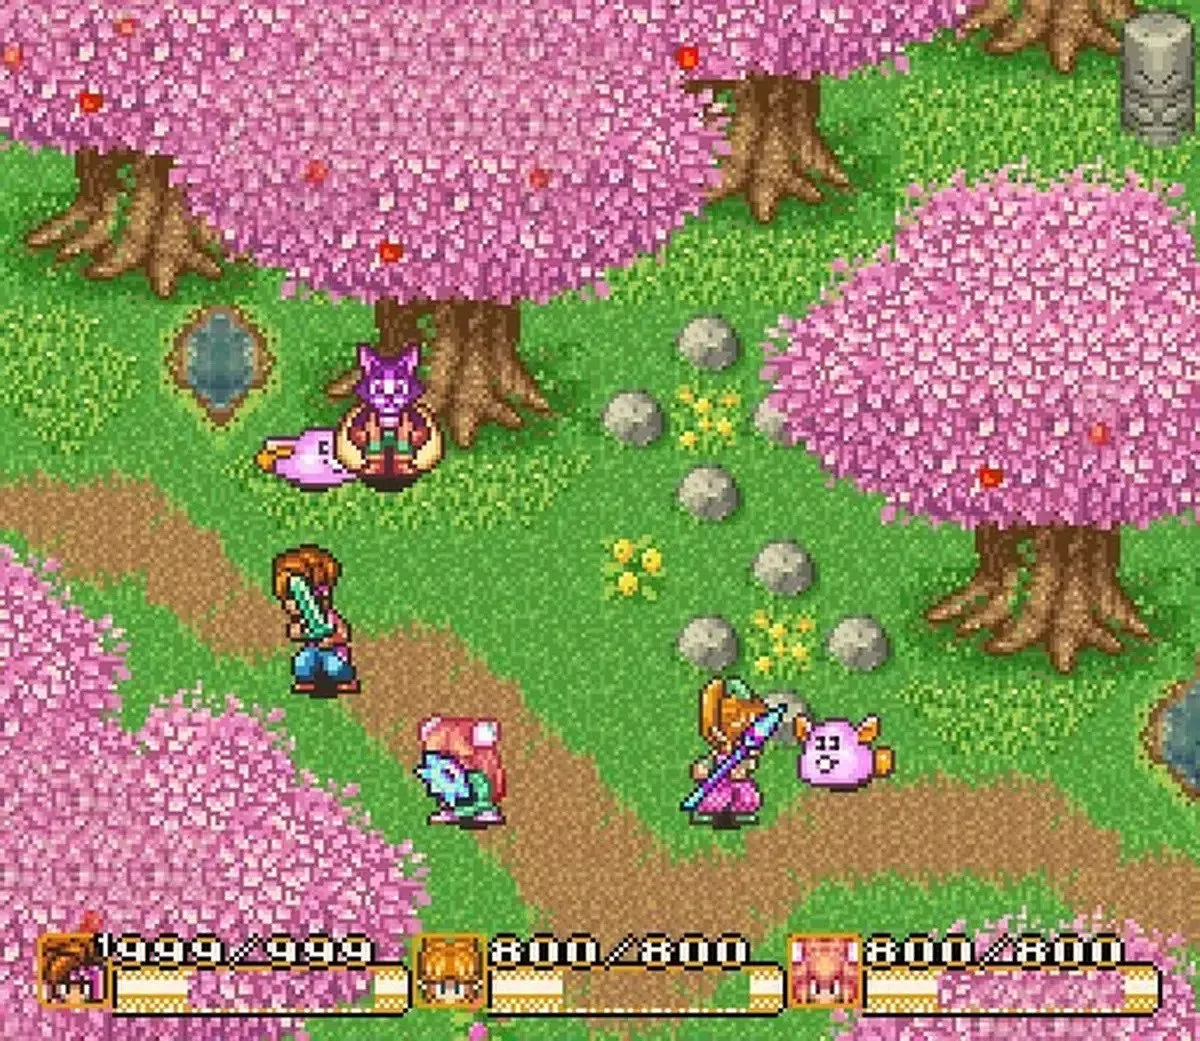 Secret of Mana Was A Foundational Action RPG We Almost Never Got